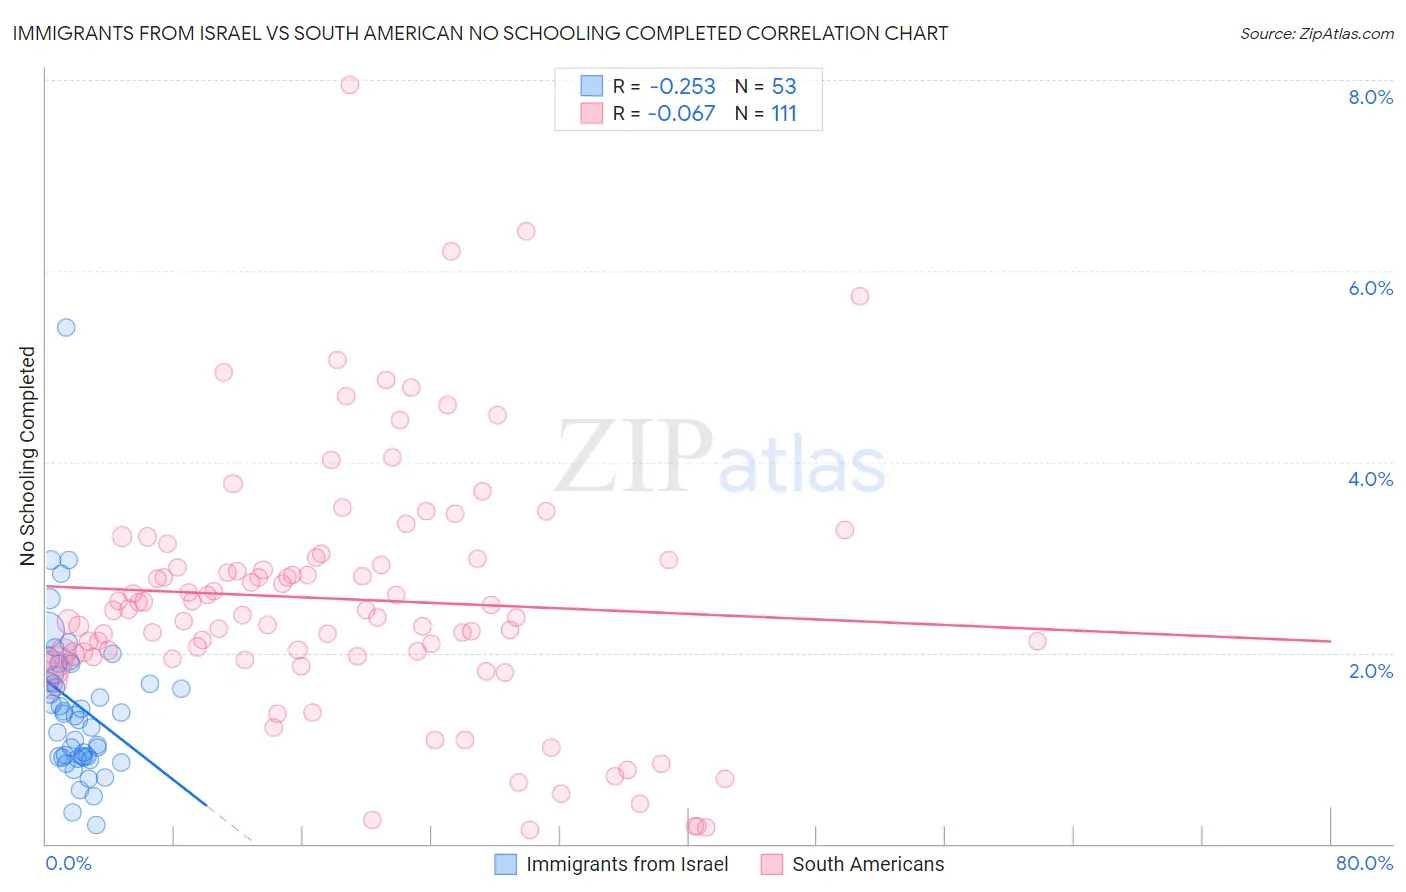 Immigrants from Israel vs South American No Schooling Completed